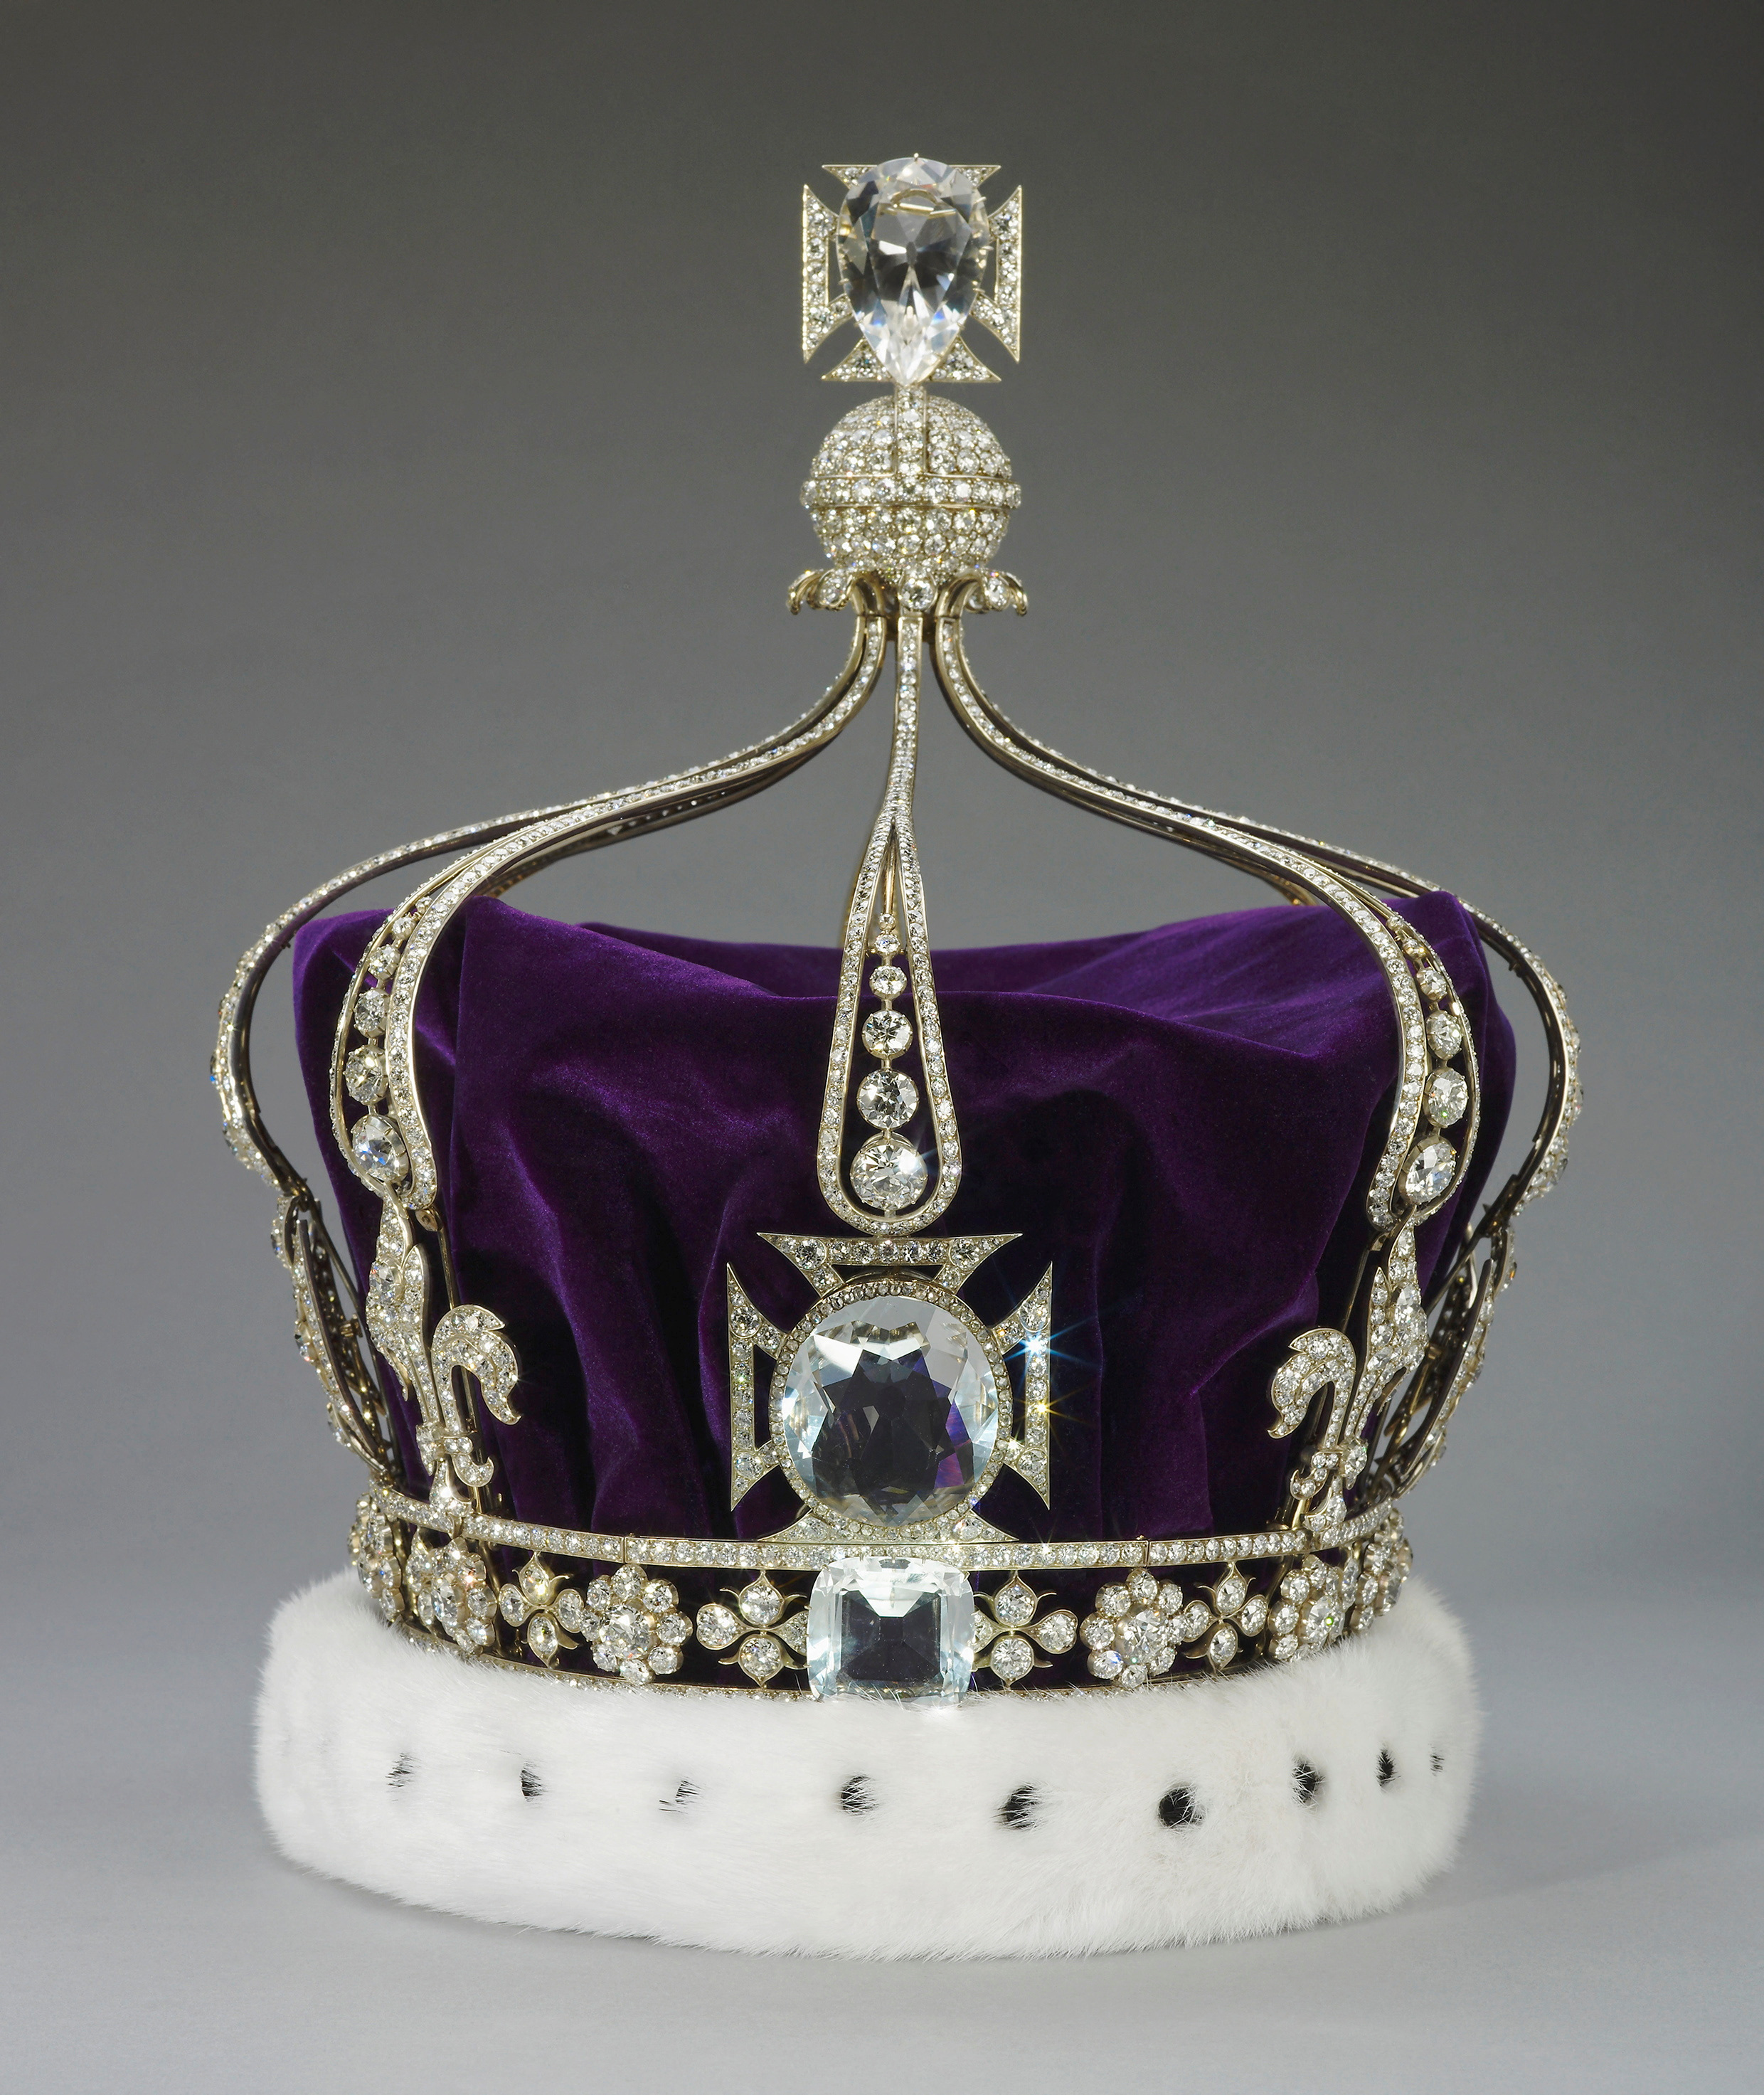 How Kohinoor Became an Integral Part of the British Crown?